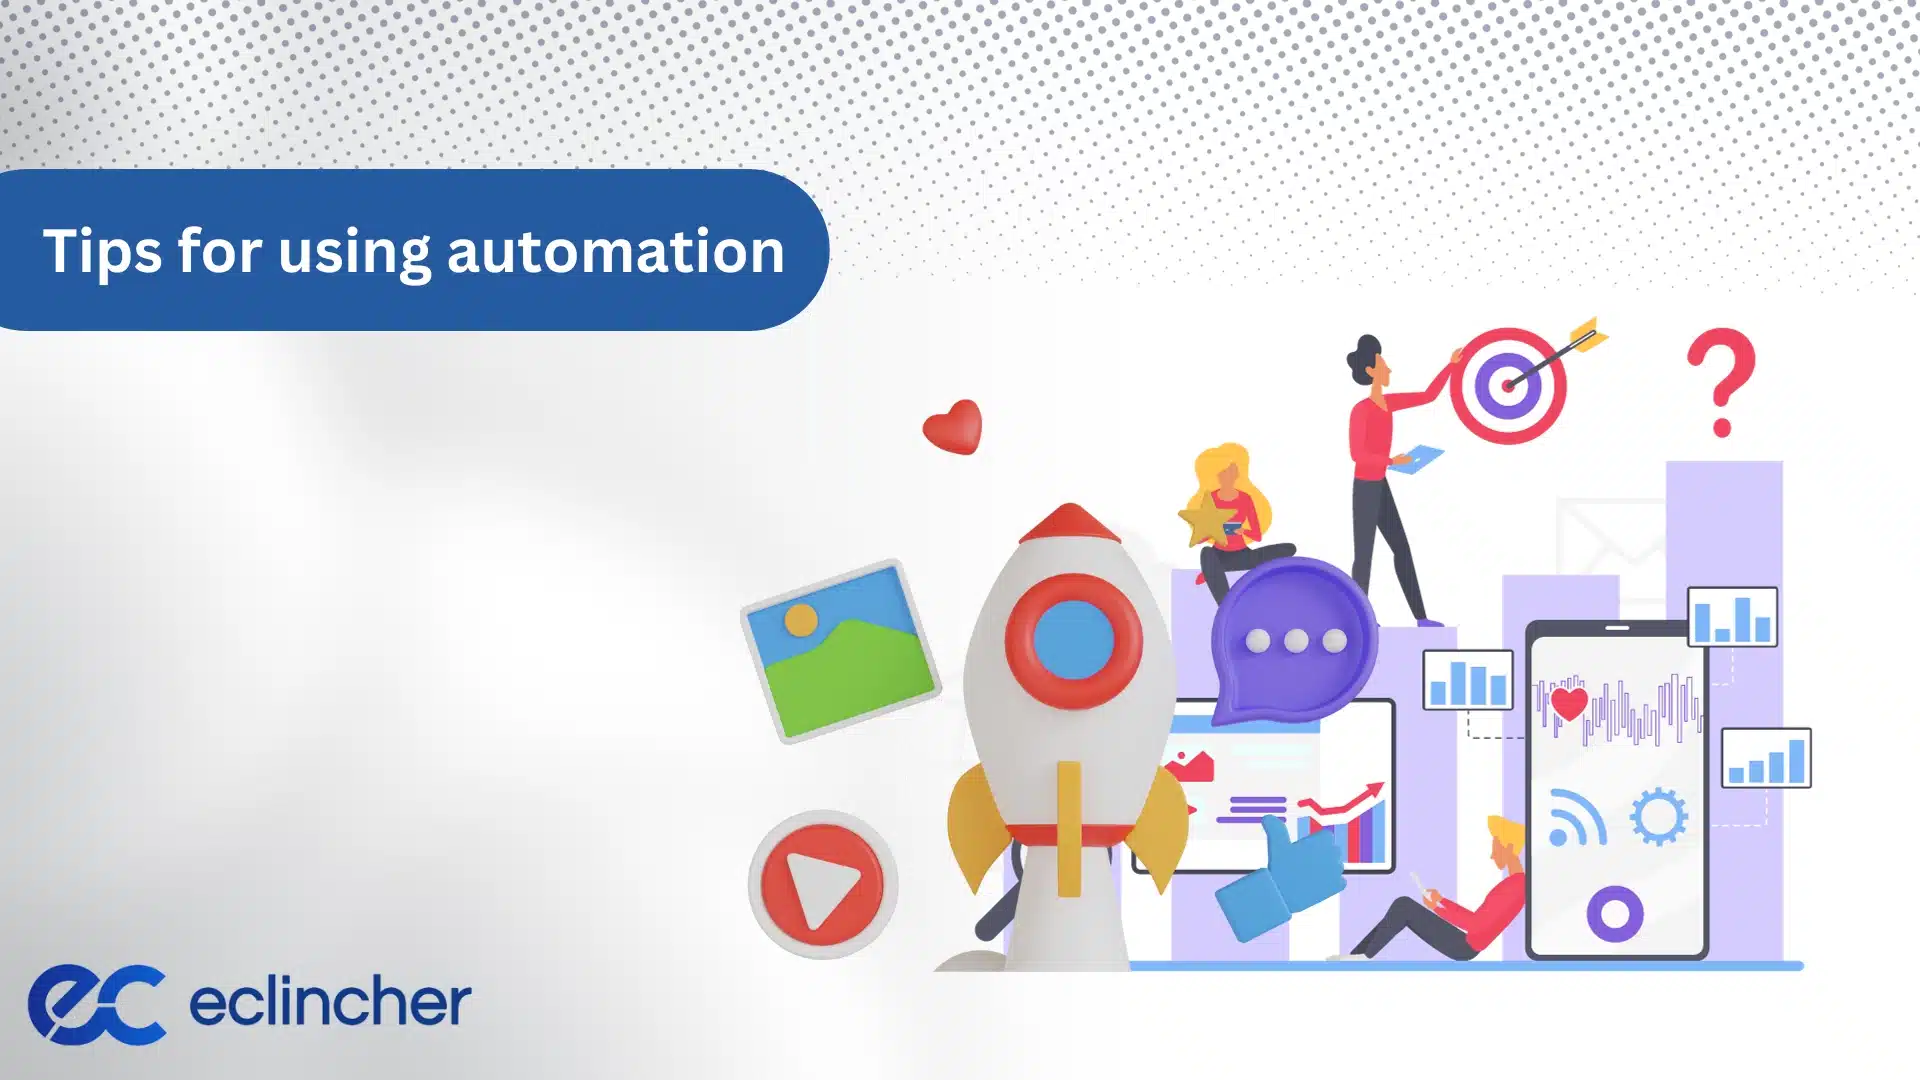 Tips for using automation more effectively